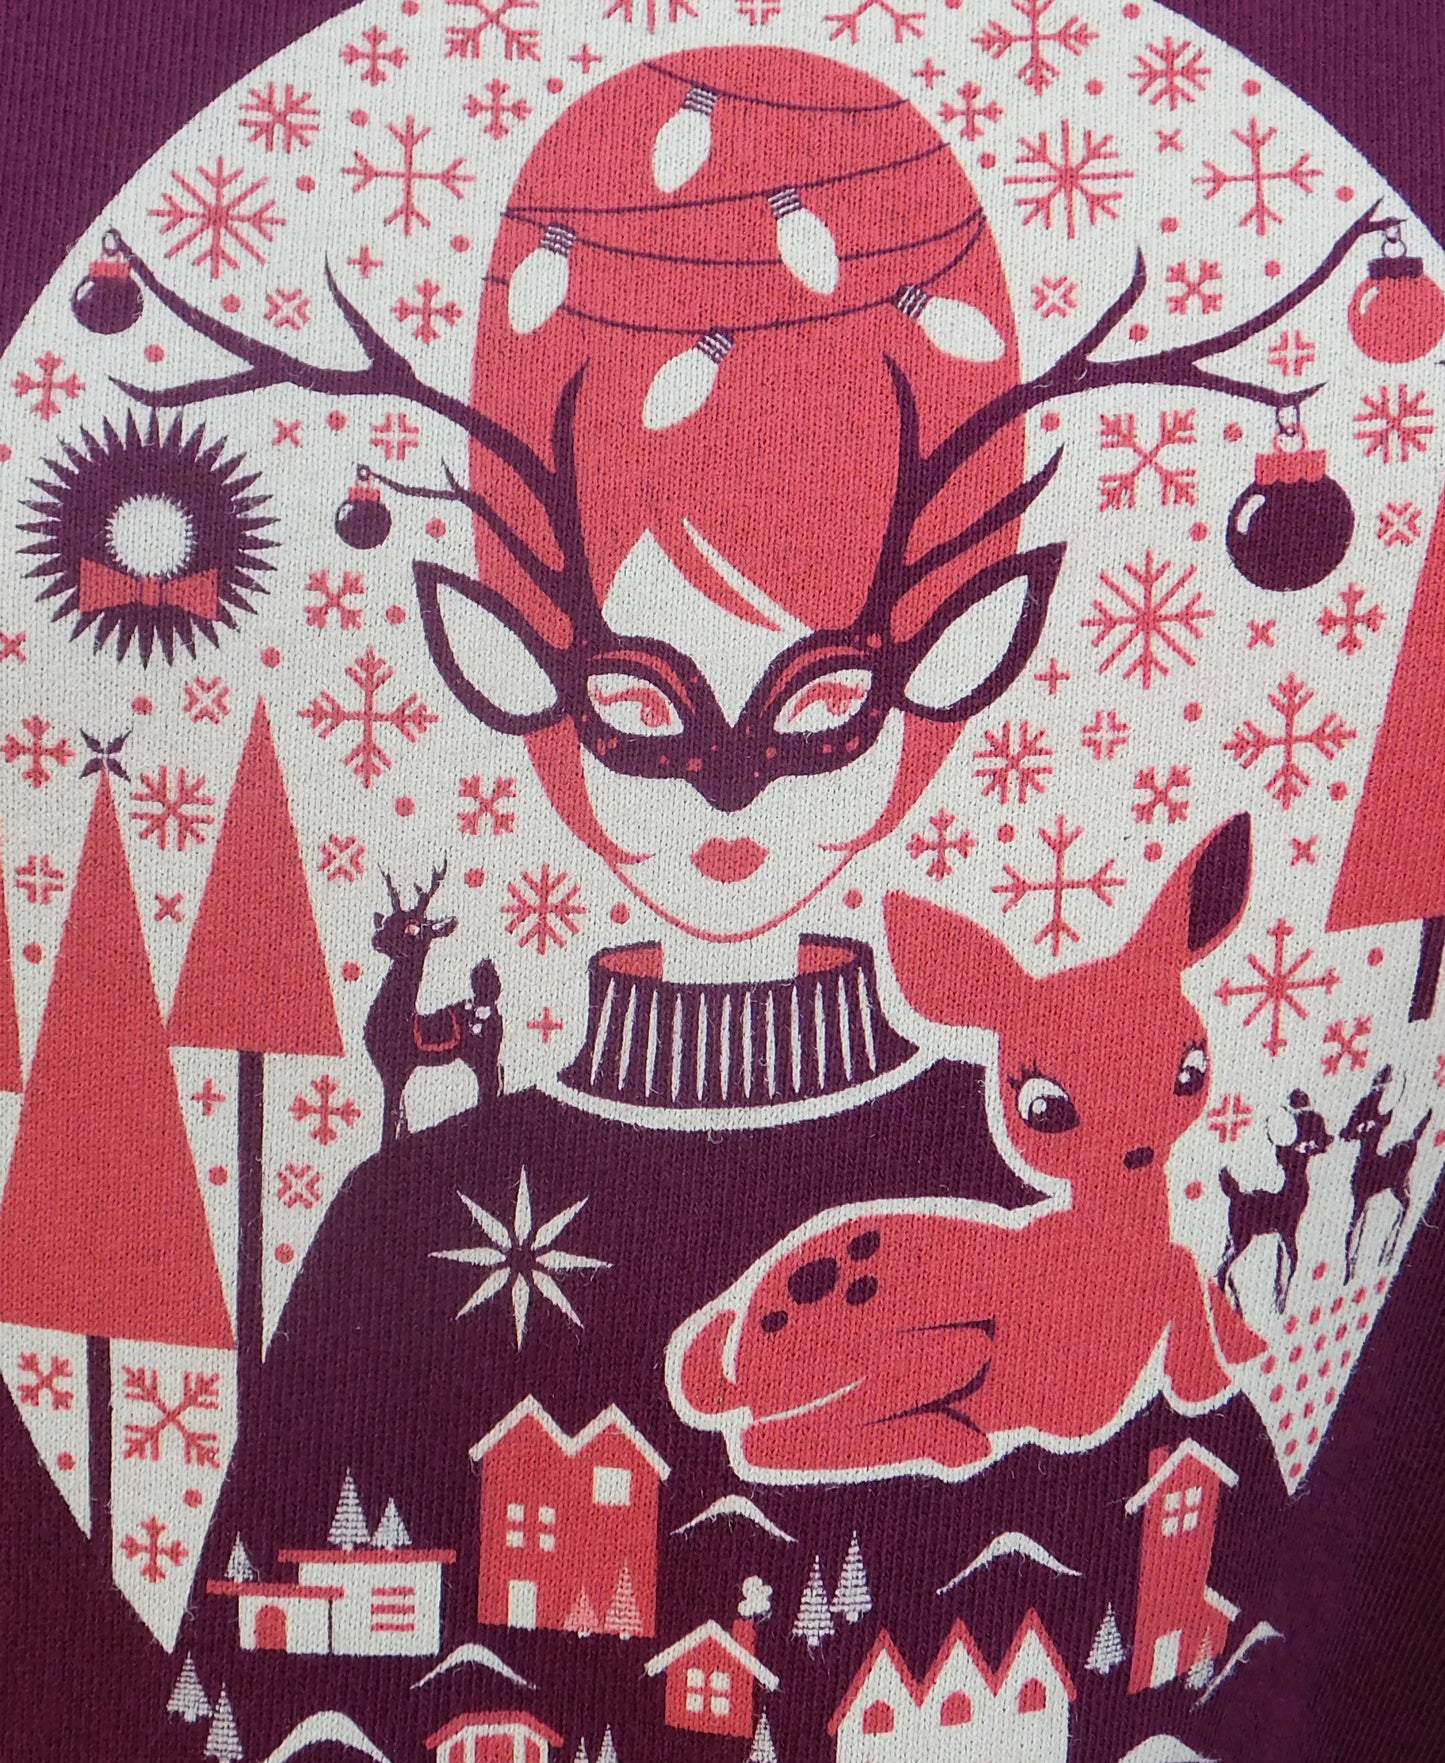 Closeup of Christmas sweater detail with girl, putz houses, deer, and wreath